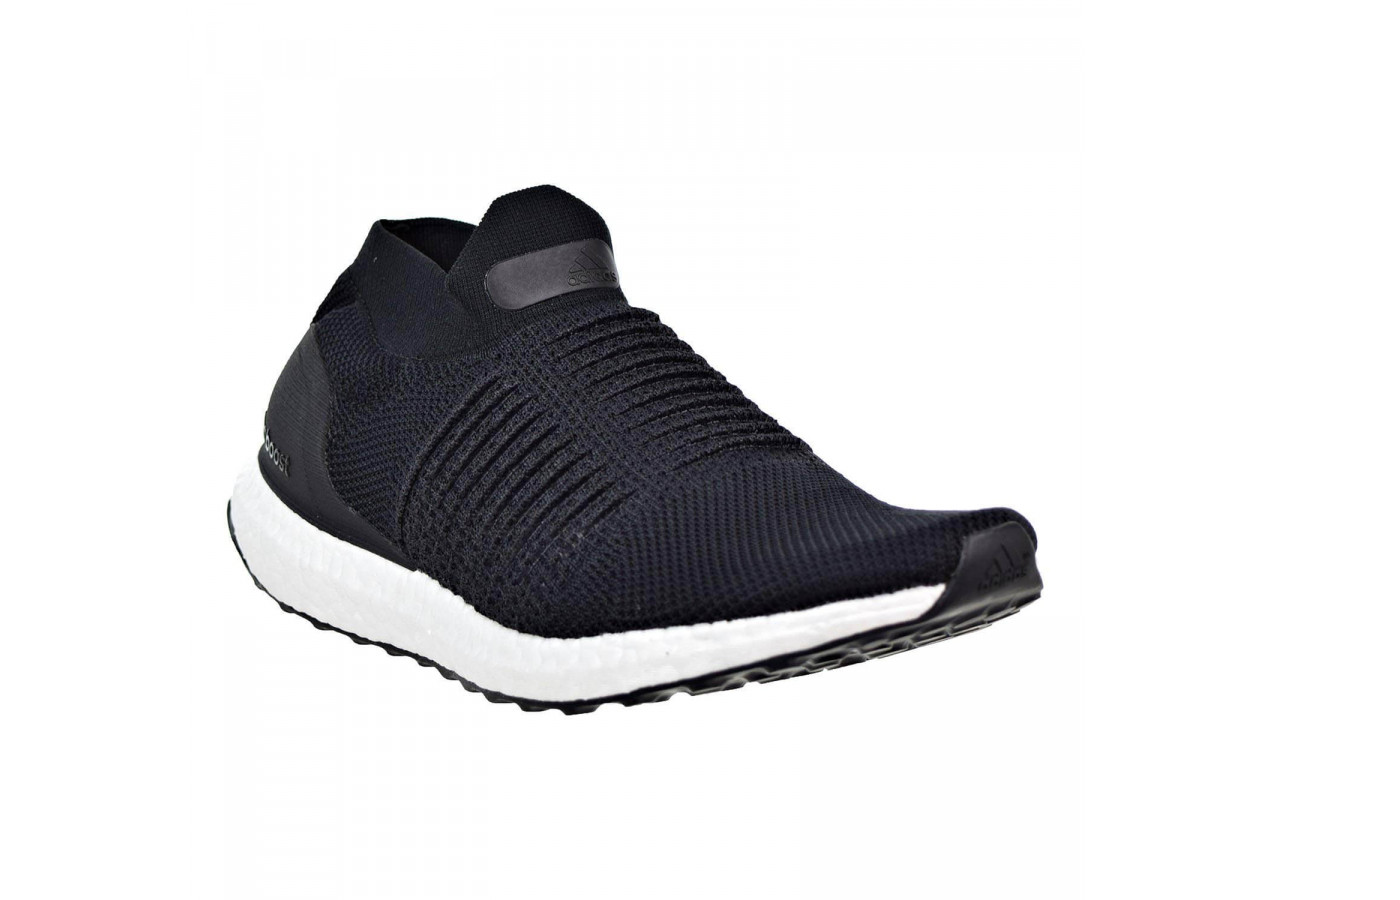 The Adidas Ultra Boost Laceless comes in very few colors.